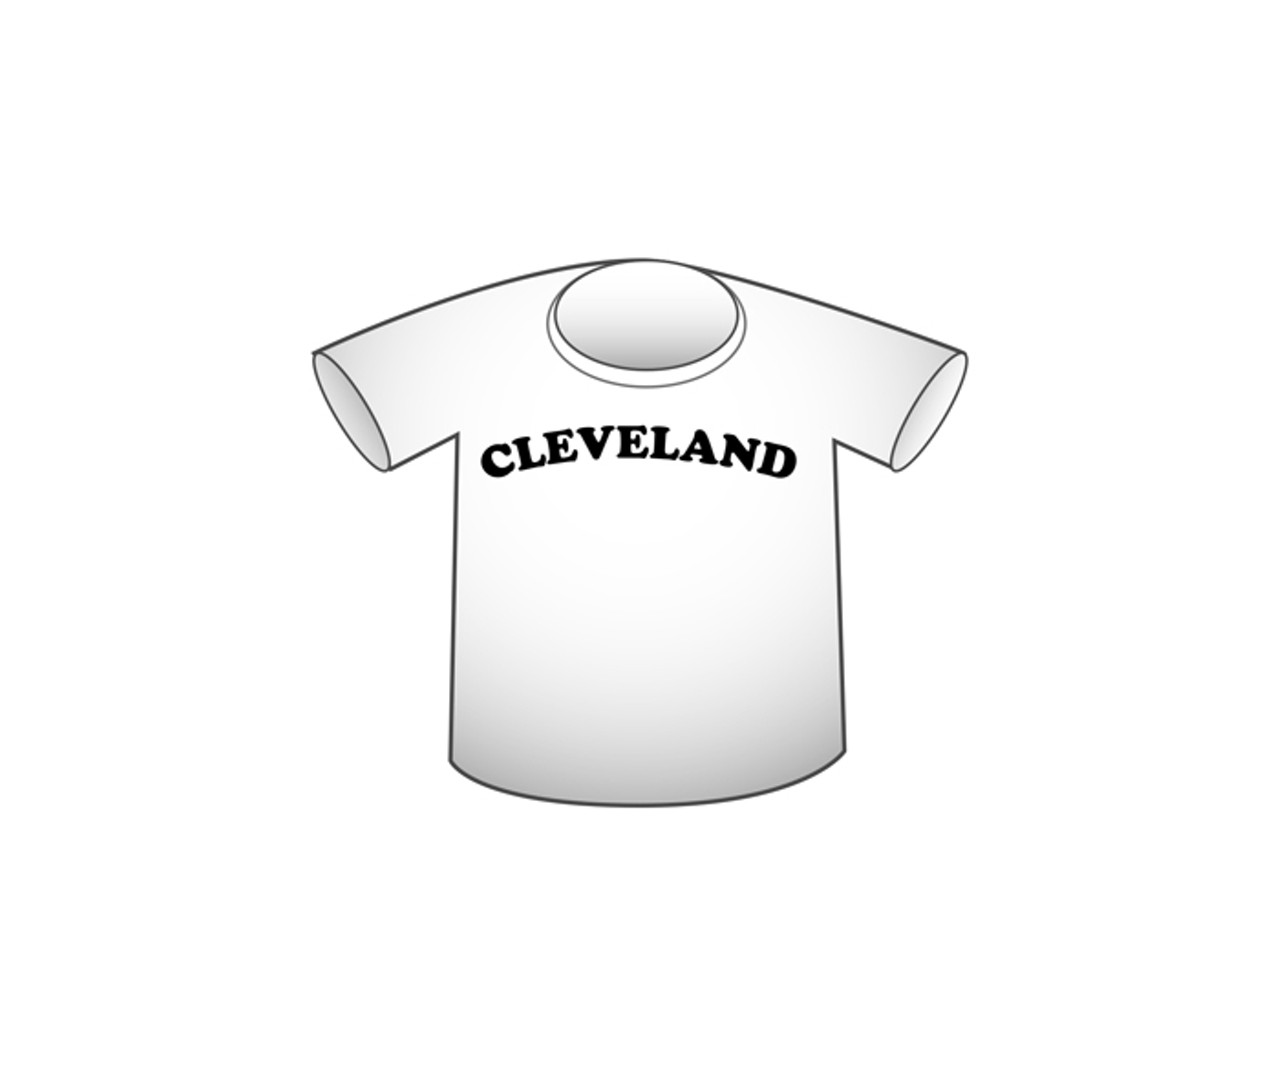 What It Is: A Cleveland T-Shirt
When To Use It: To express the money grab of any cottage industry that sprouts up around Cleveland boosterism. Can also be used to comment on the next group that will inevitably splash CLE or 216 or the outline of the Buckeye State on some cotton threads with little or no imagination and try to sell it to you for $25.